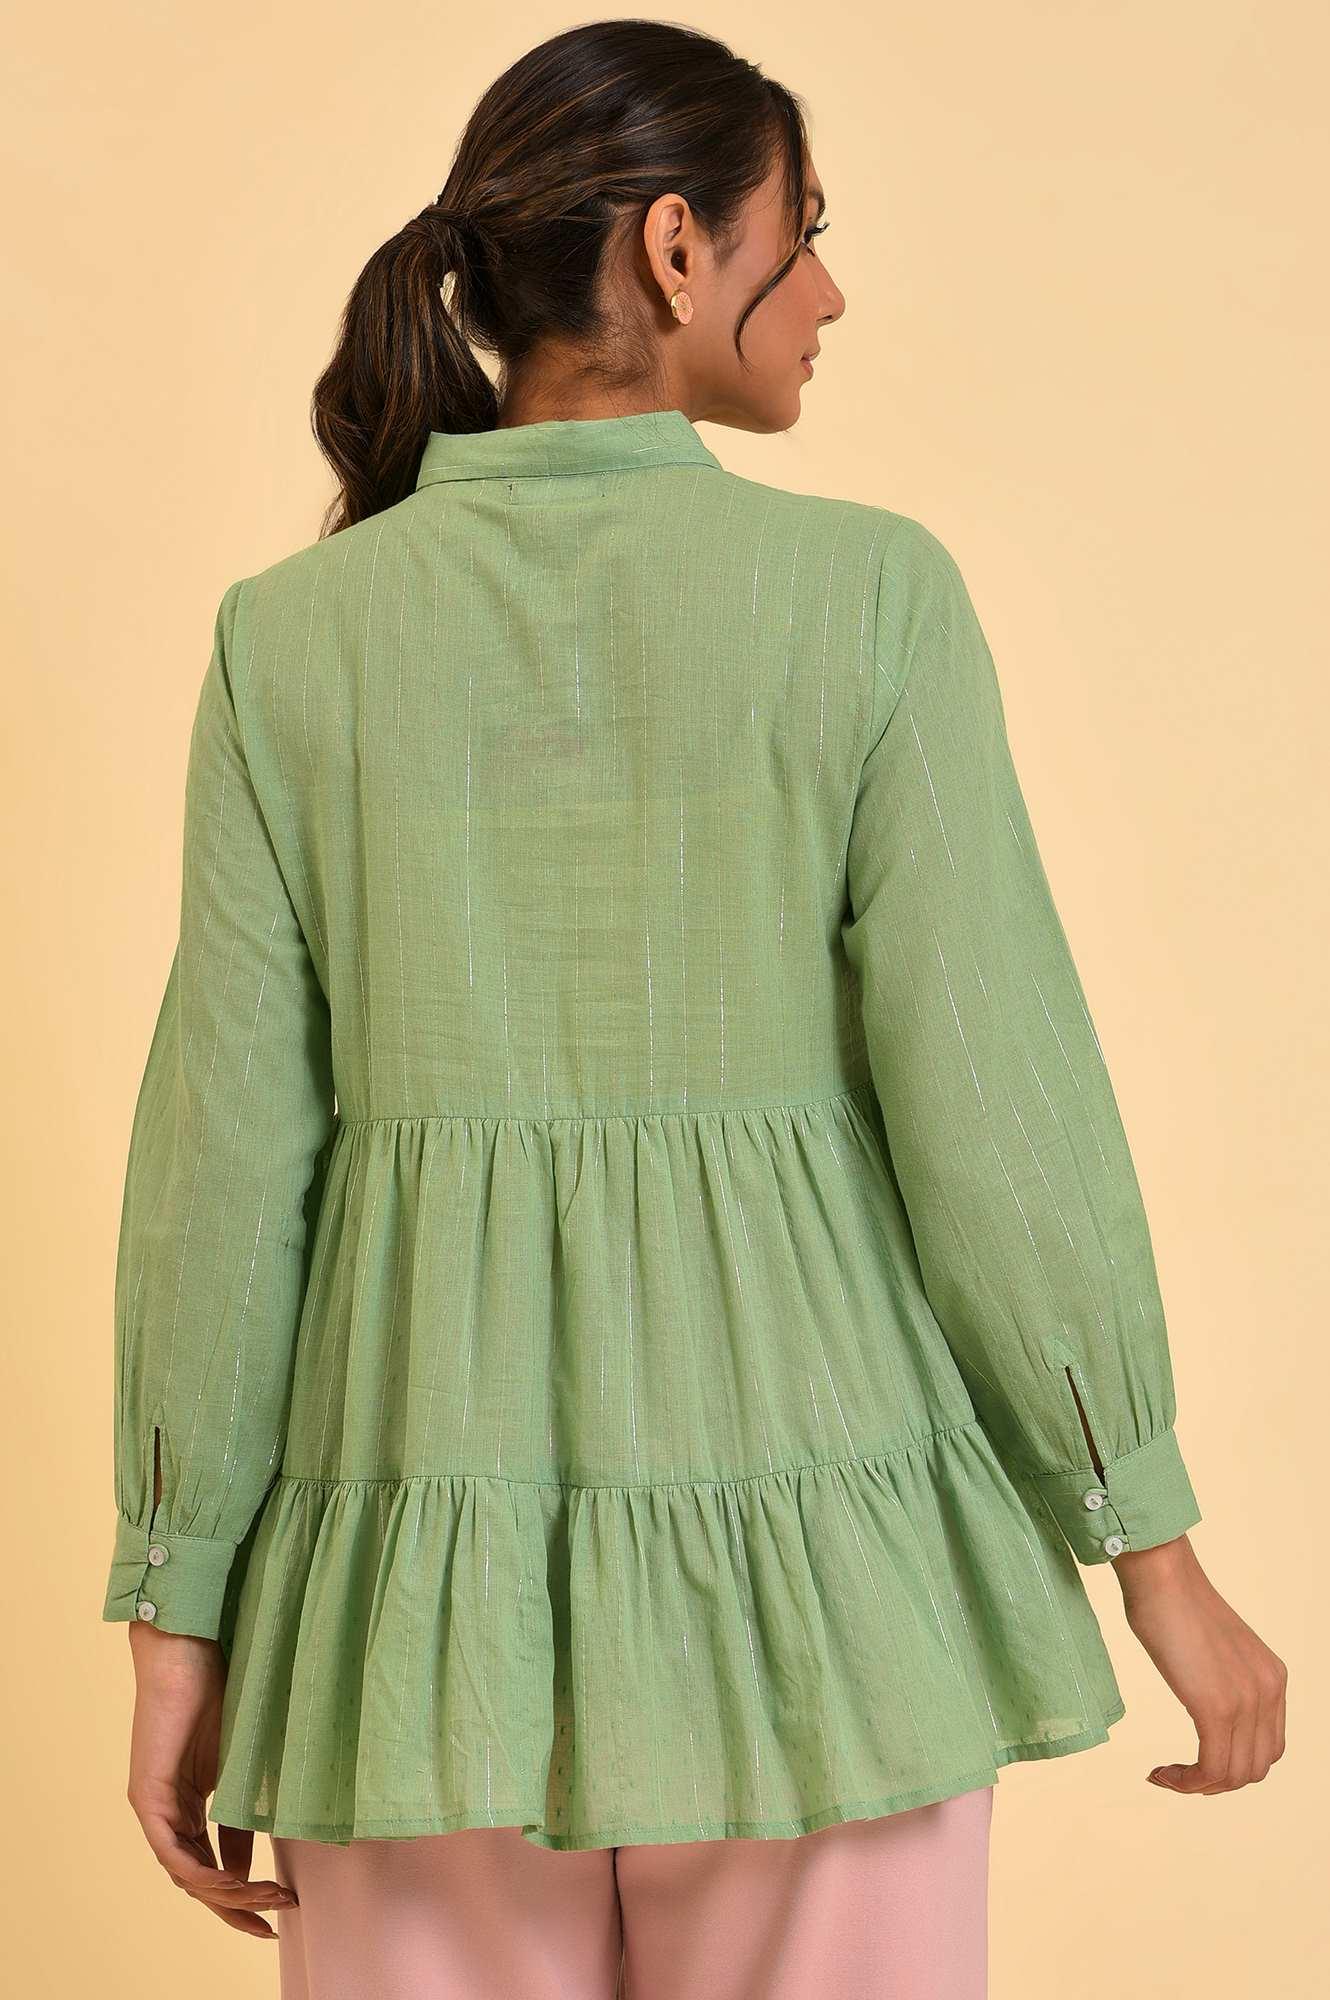 Green Lurex Stripes Embroidered Tiered Top - wforwoman